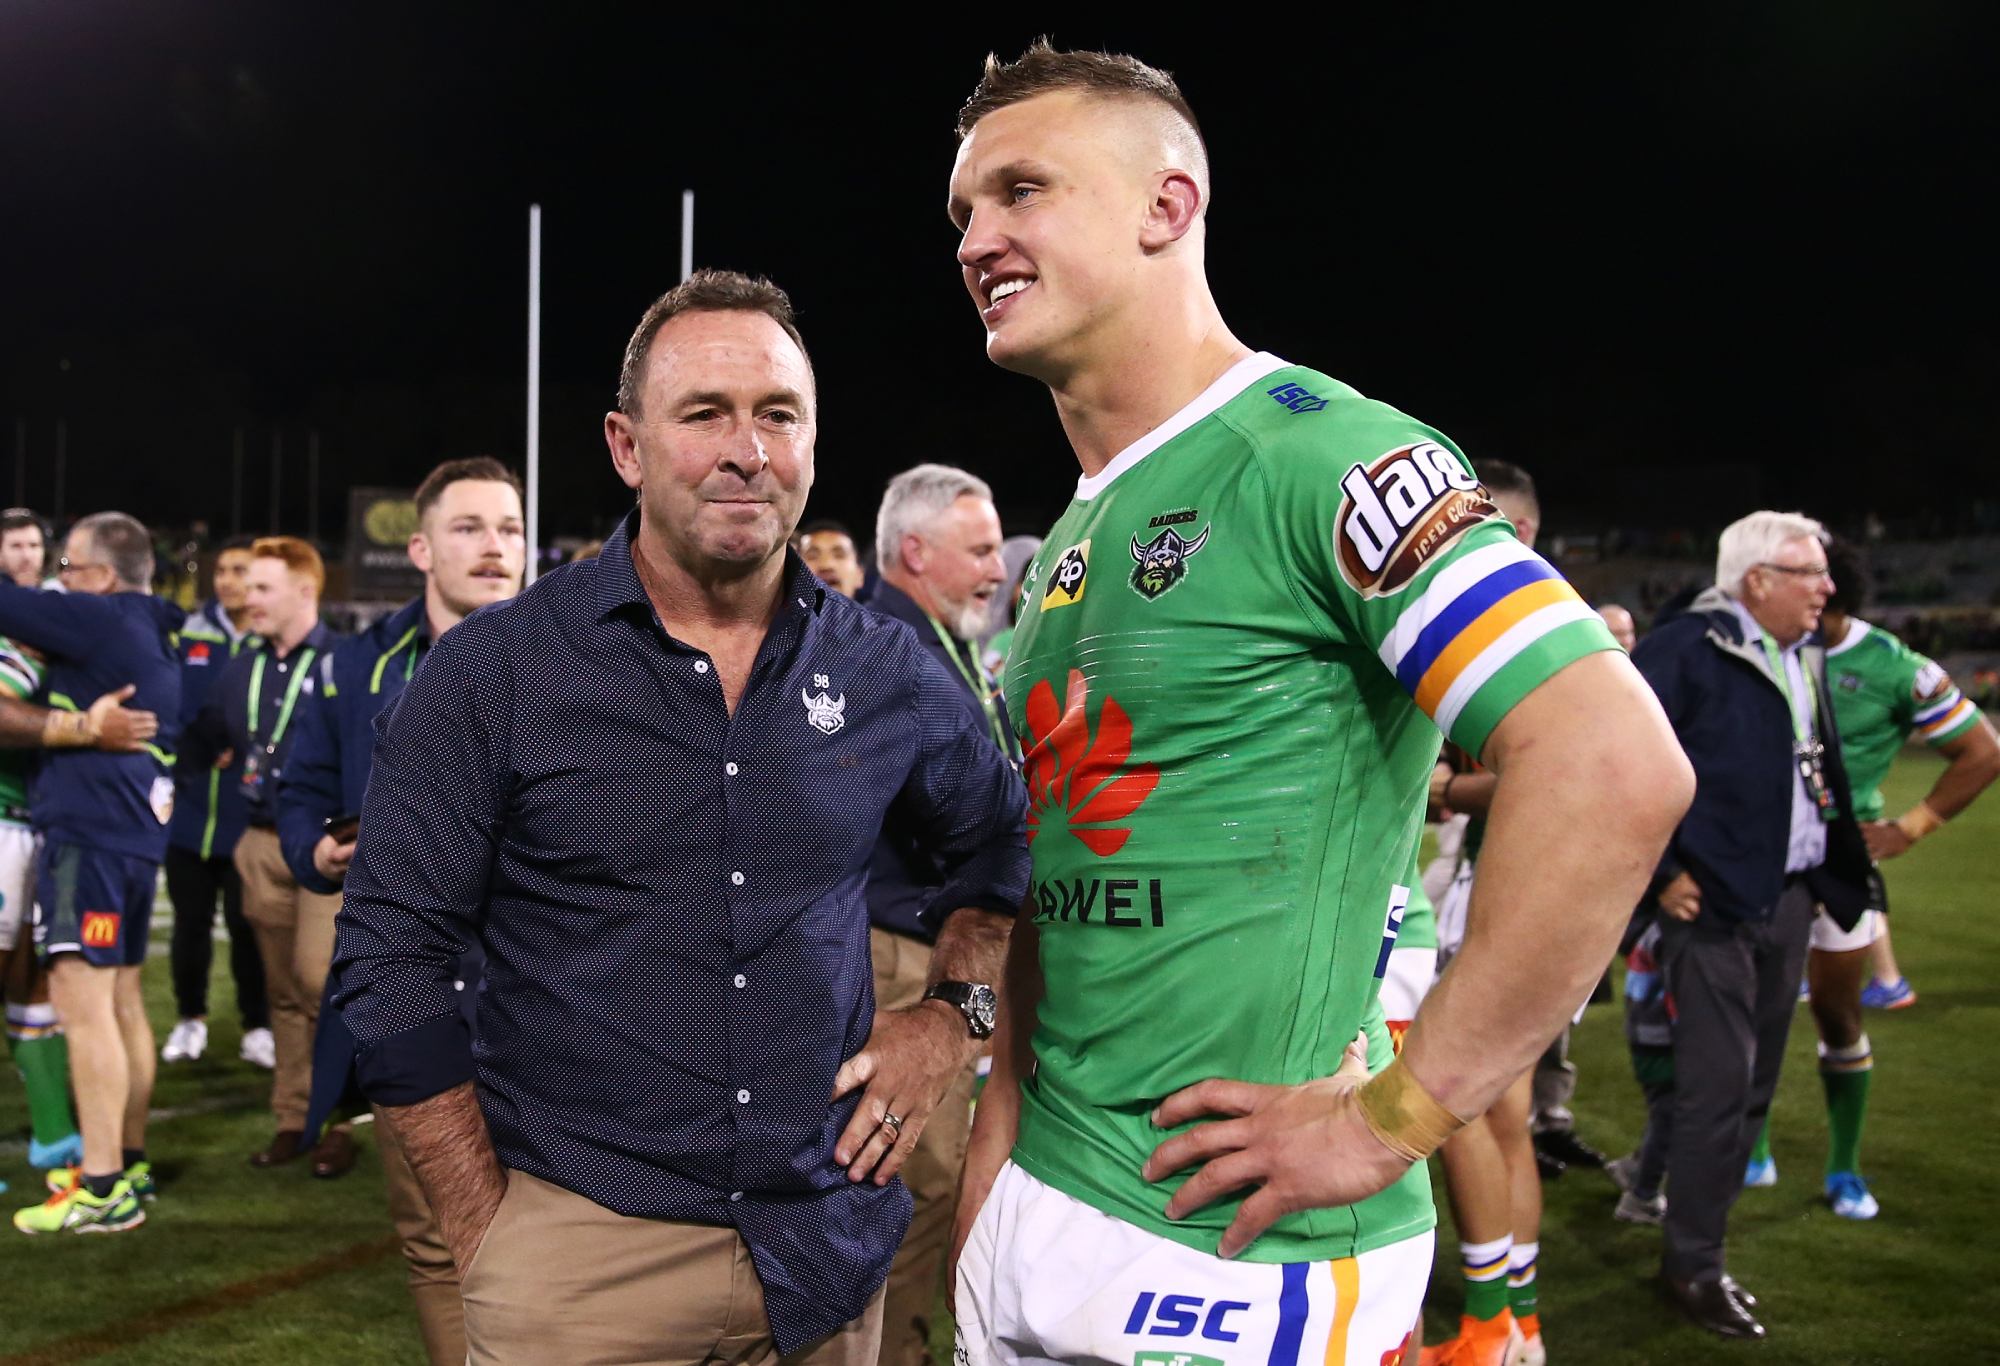 CANBERRA, AUSTRALIA - SEPTEMBER 27: Raiders Coach, Ricky Stuart speaks with Jack Wighton of the Raiders following the NRL Preliminary Final match between the Canberra Raiders and the South Sydney Rabbitohs at GIO Stadium on September 27, 2019 in Canberra, Australia. (Photo by Brendon Thorne/Getty Images)